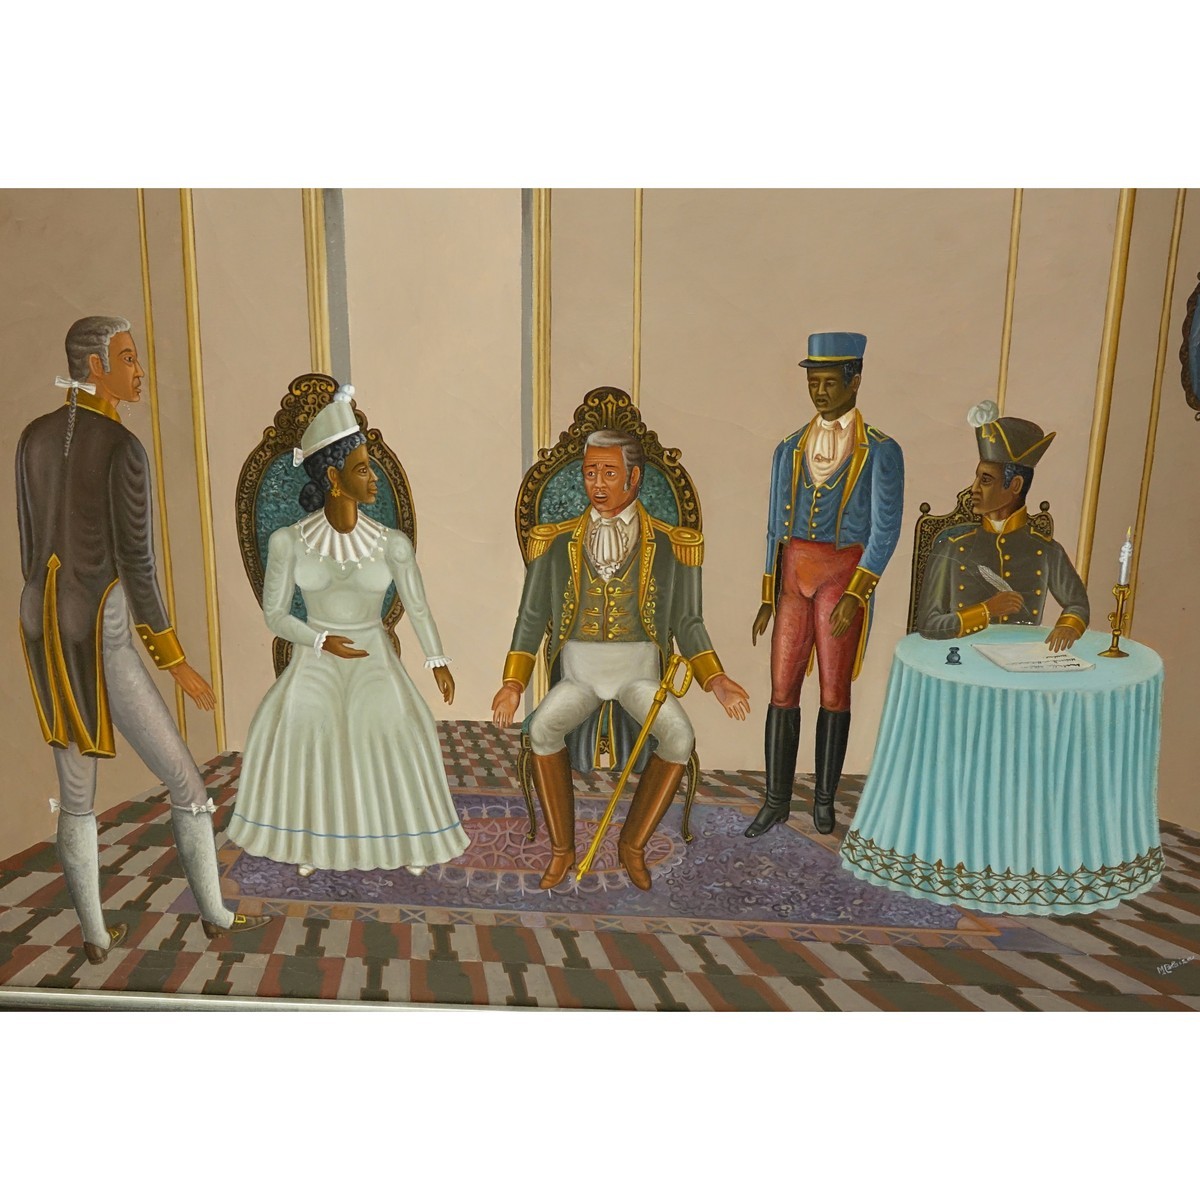 Serge Moleon Blaise, Haitian (born 1954) Oil on Canvas, Interior Scene with President Alexandre Pétion and his Statemen, Signed Lower Right. Artist information attached en verso.